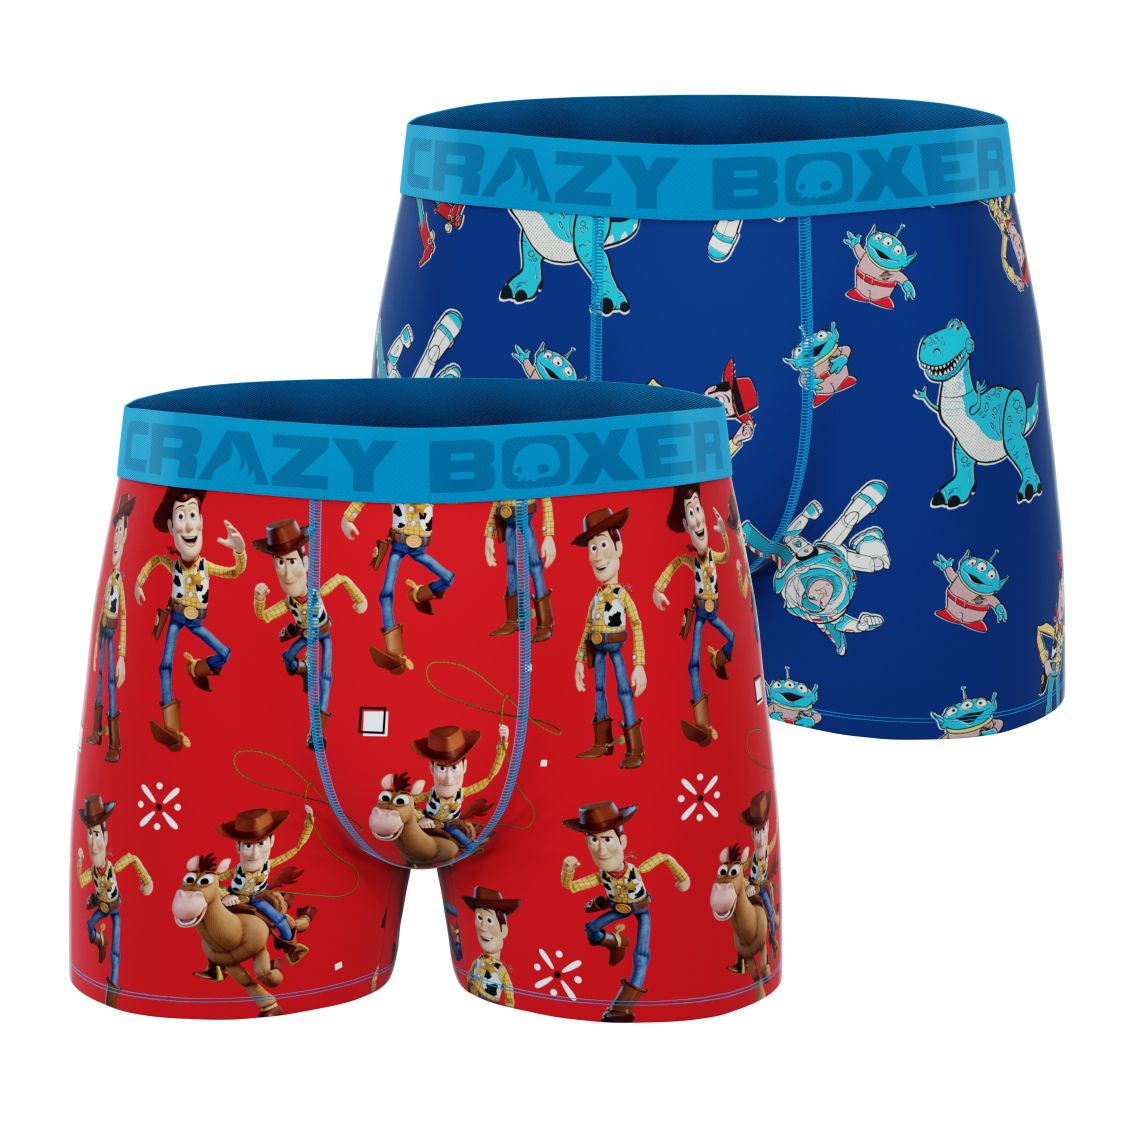 CRAZYBOXER Toy Story All Characters Men's Boxer Briefs (2 pack